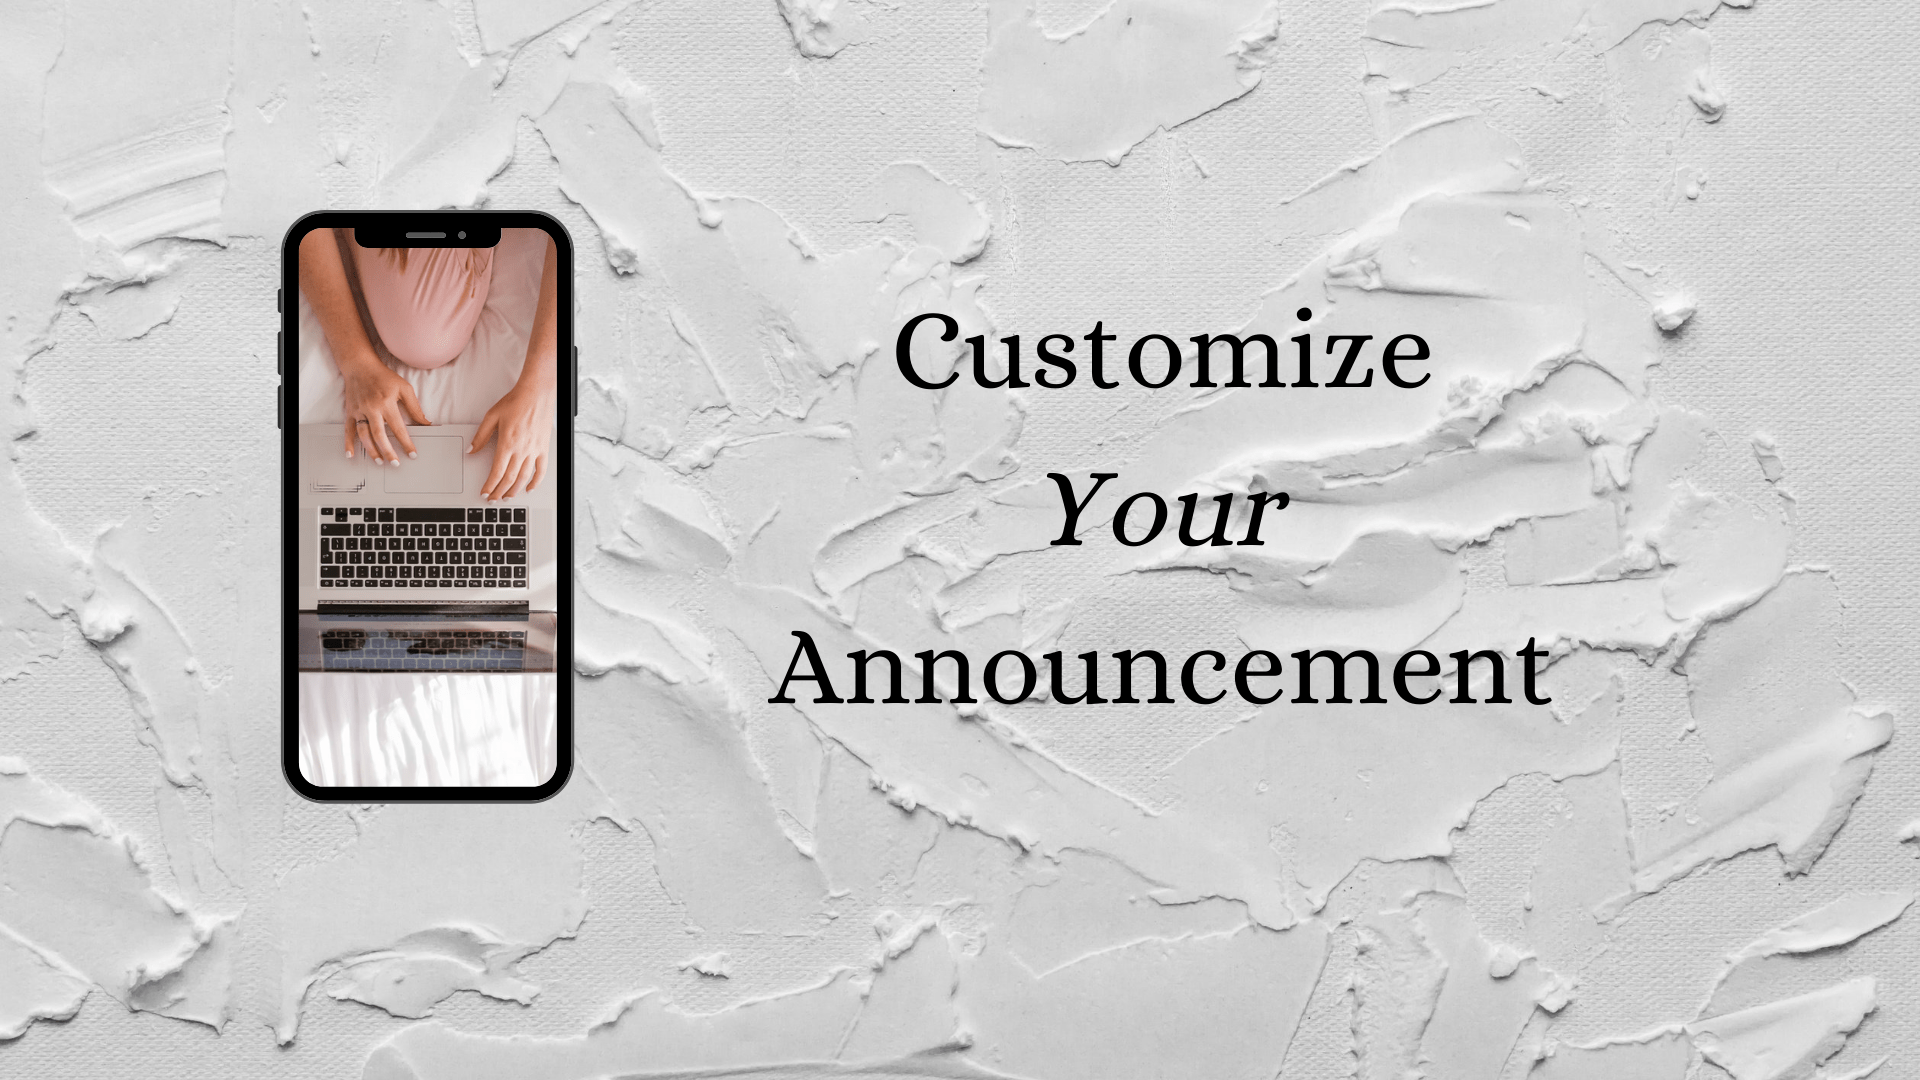 How to Customize Your Announcement Request